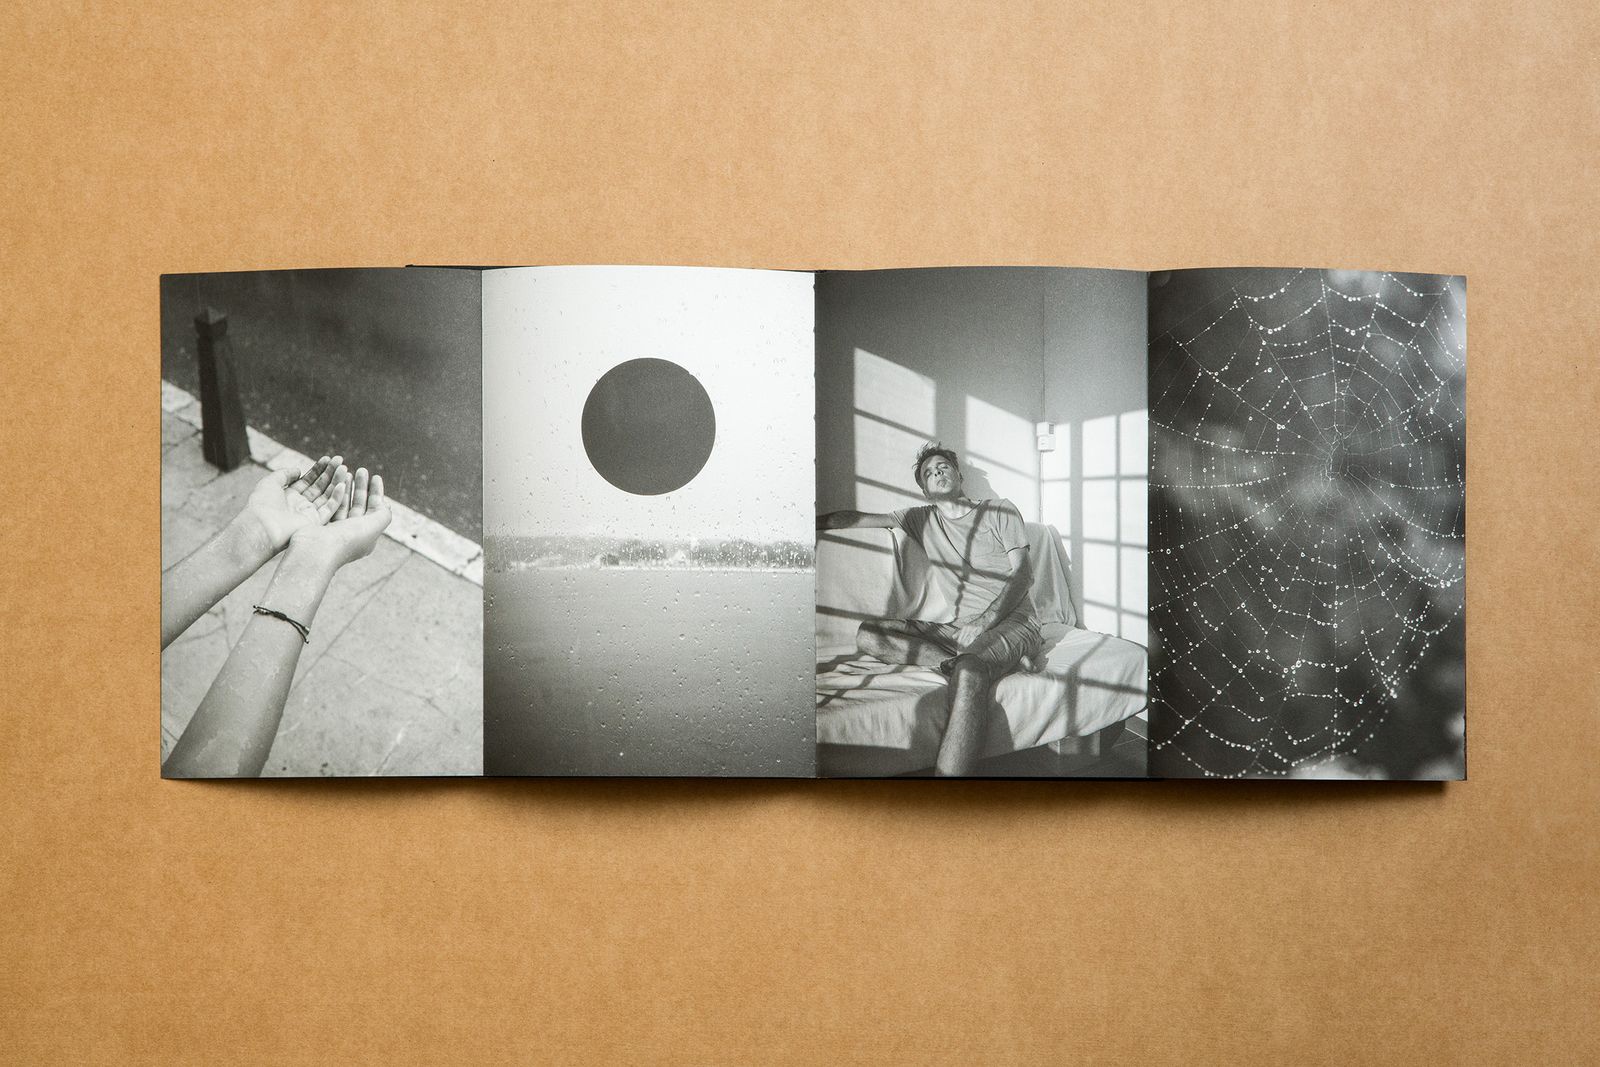 Photobook Review: Summer's Almost Gone By Alex Llovet